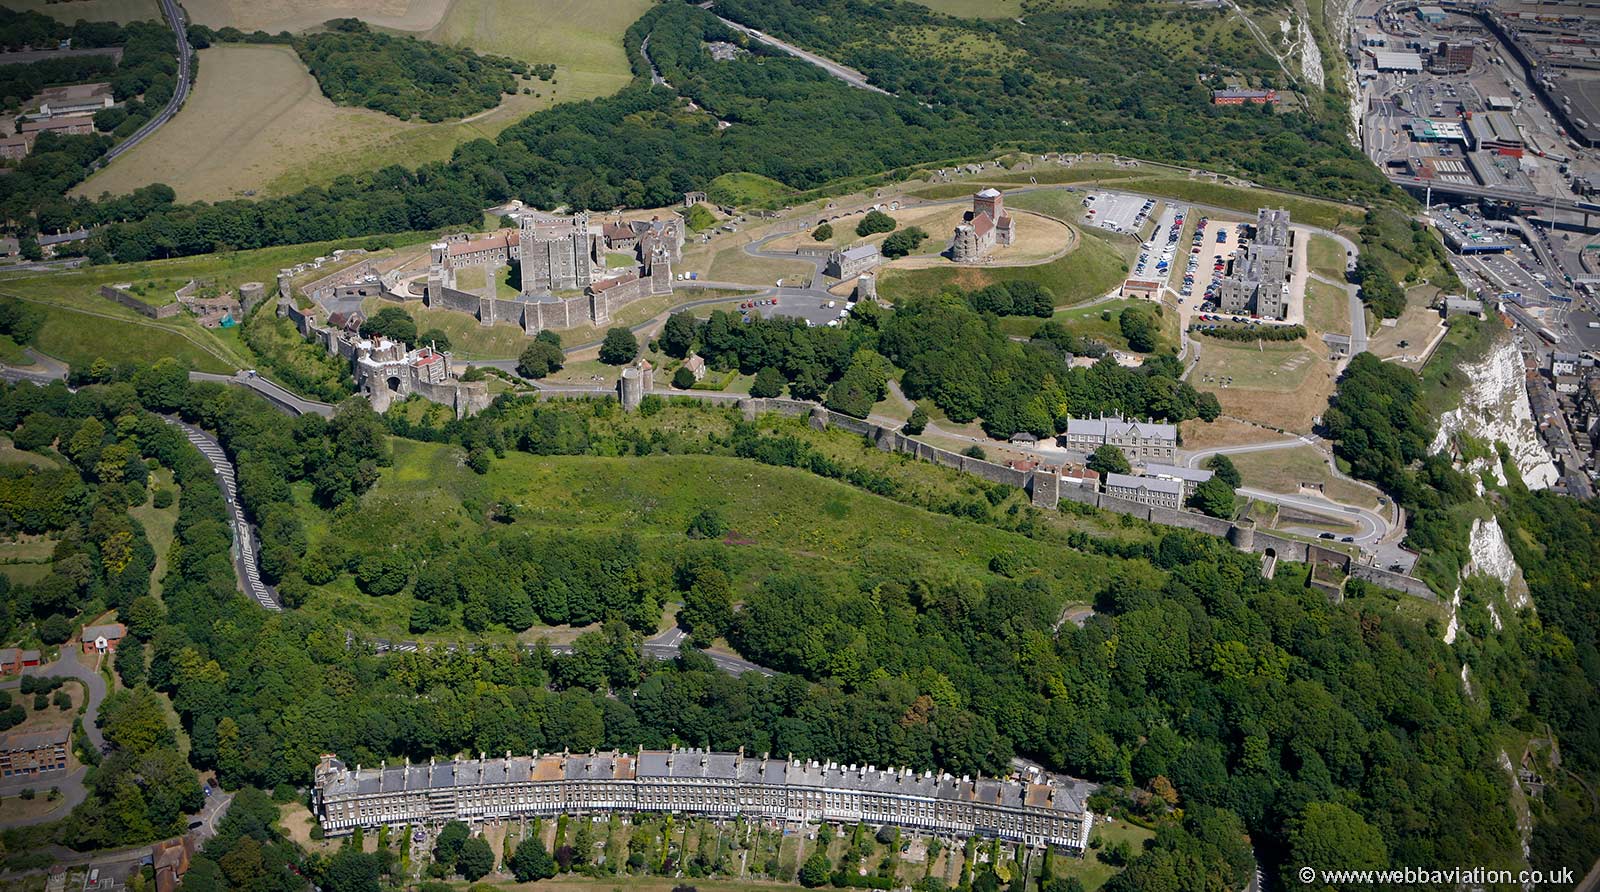 Dover Castle from the air